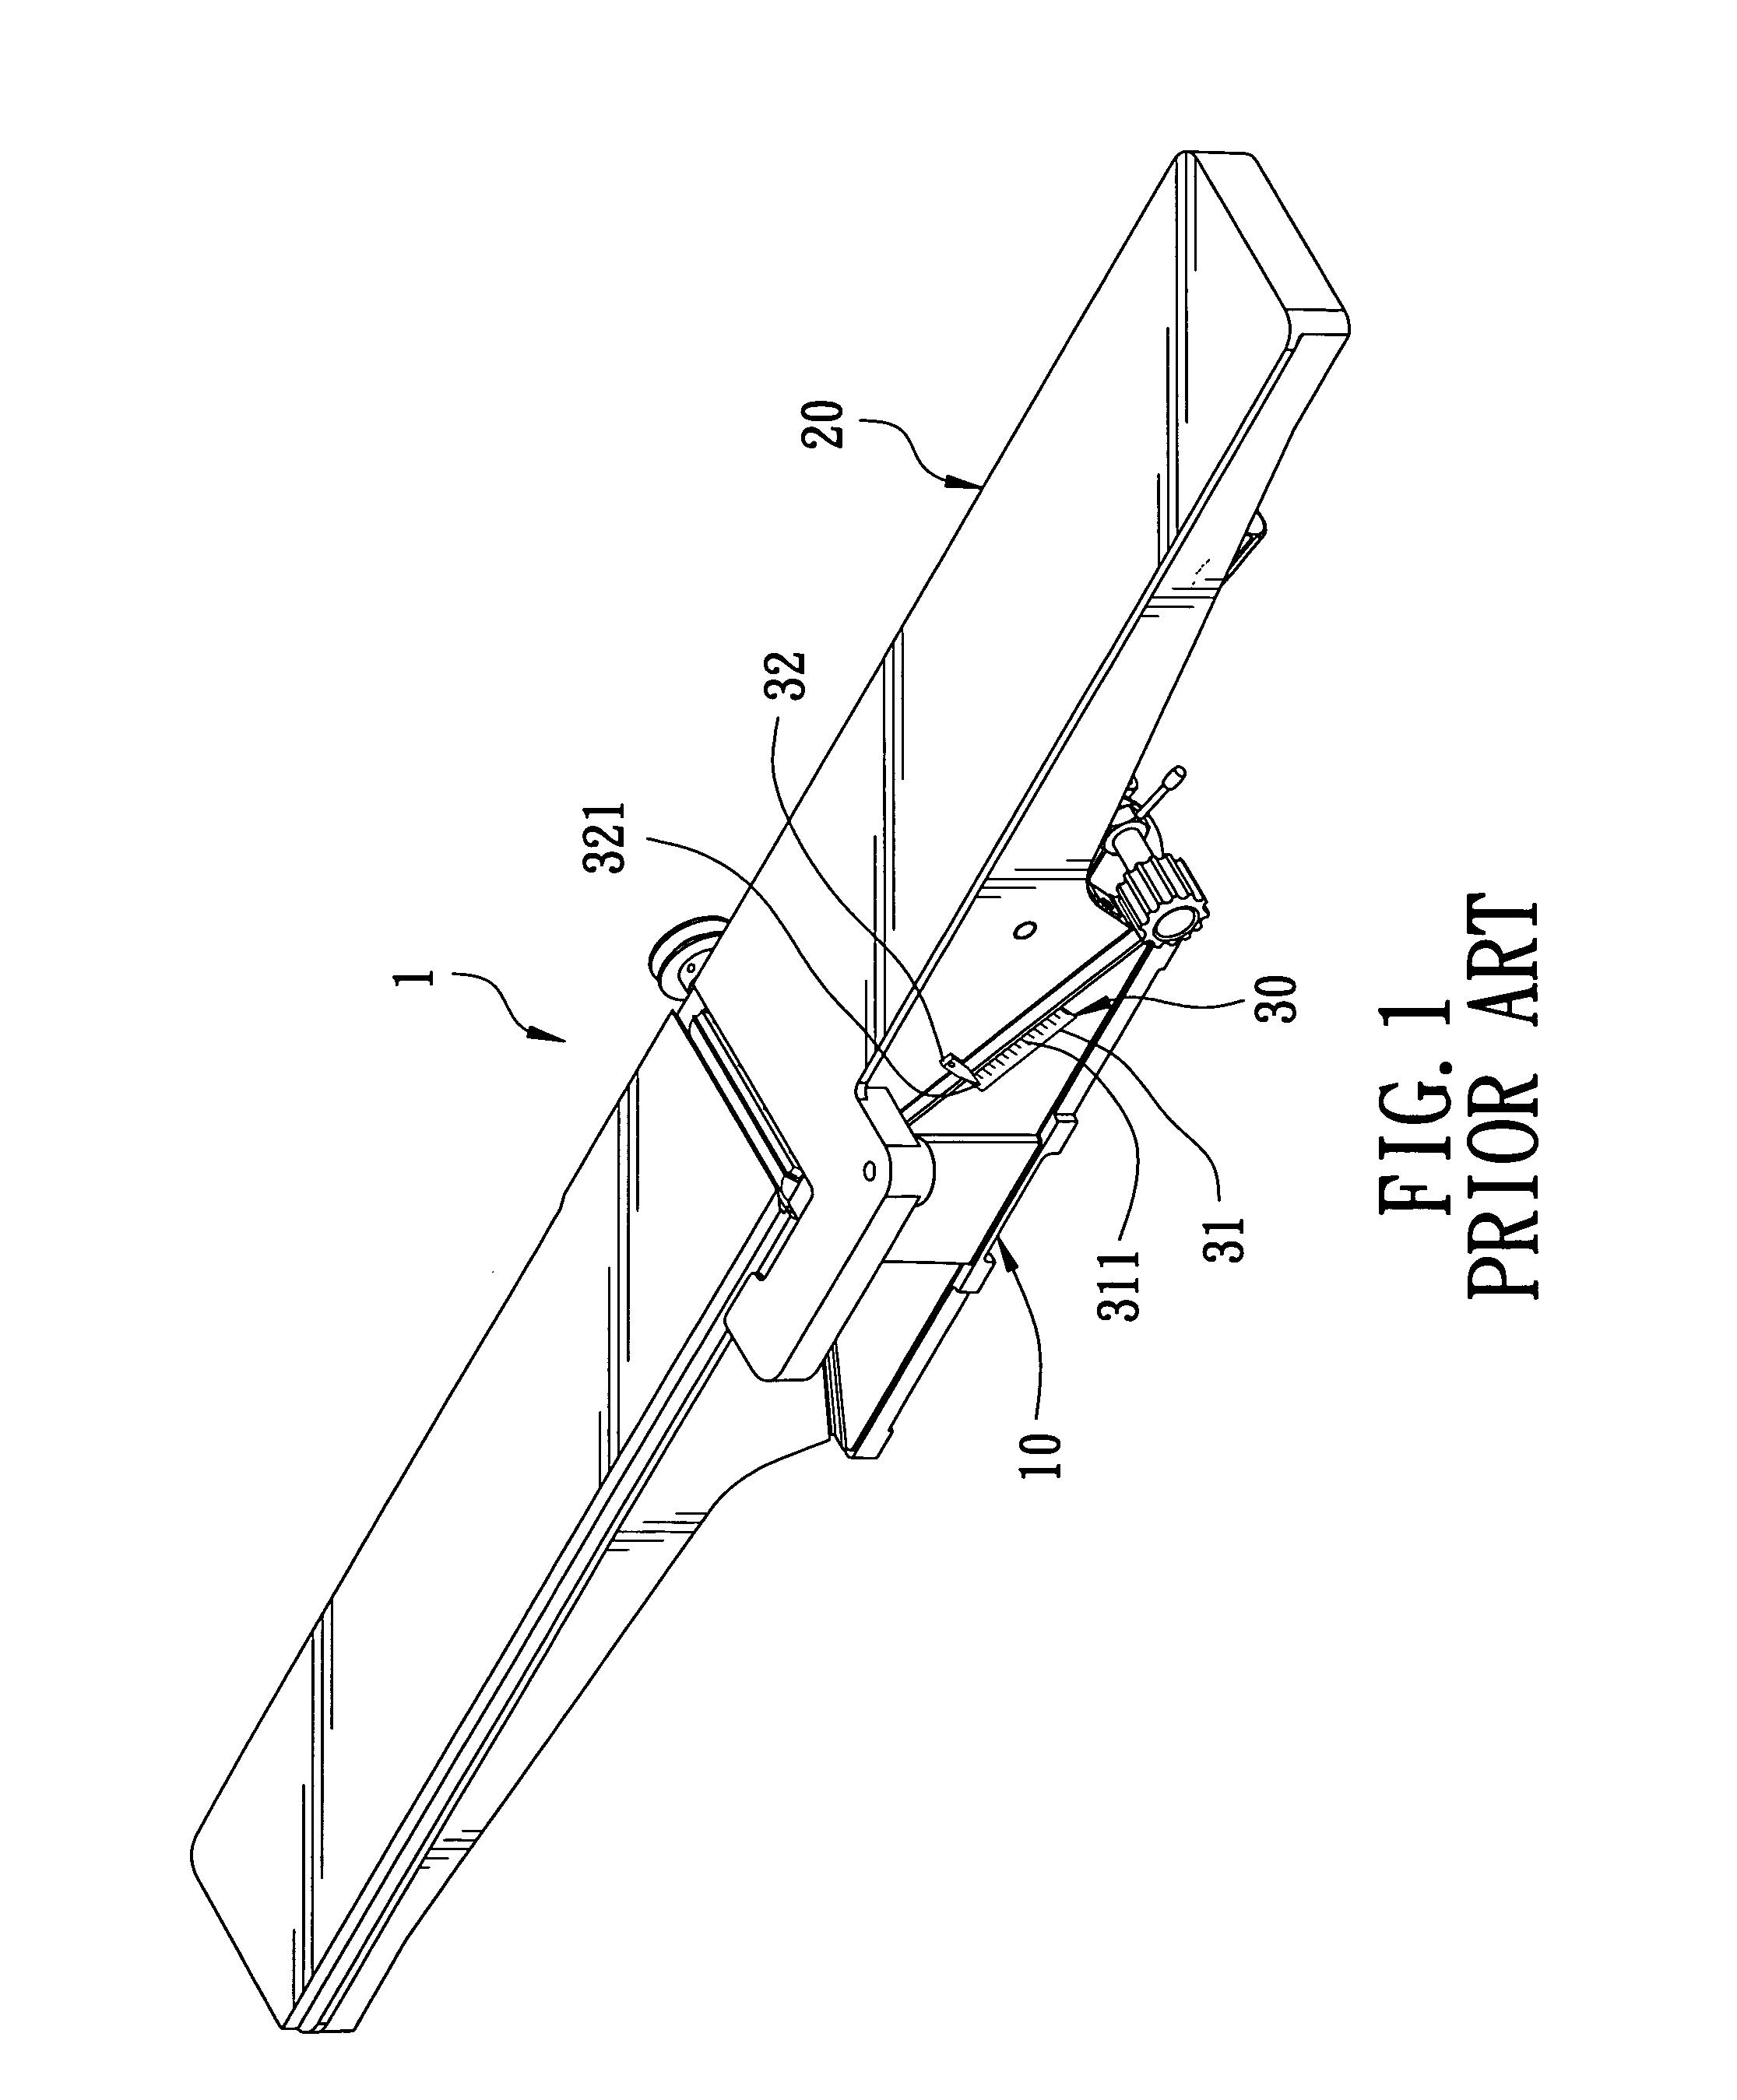 Indicating device with large graduations for a plane